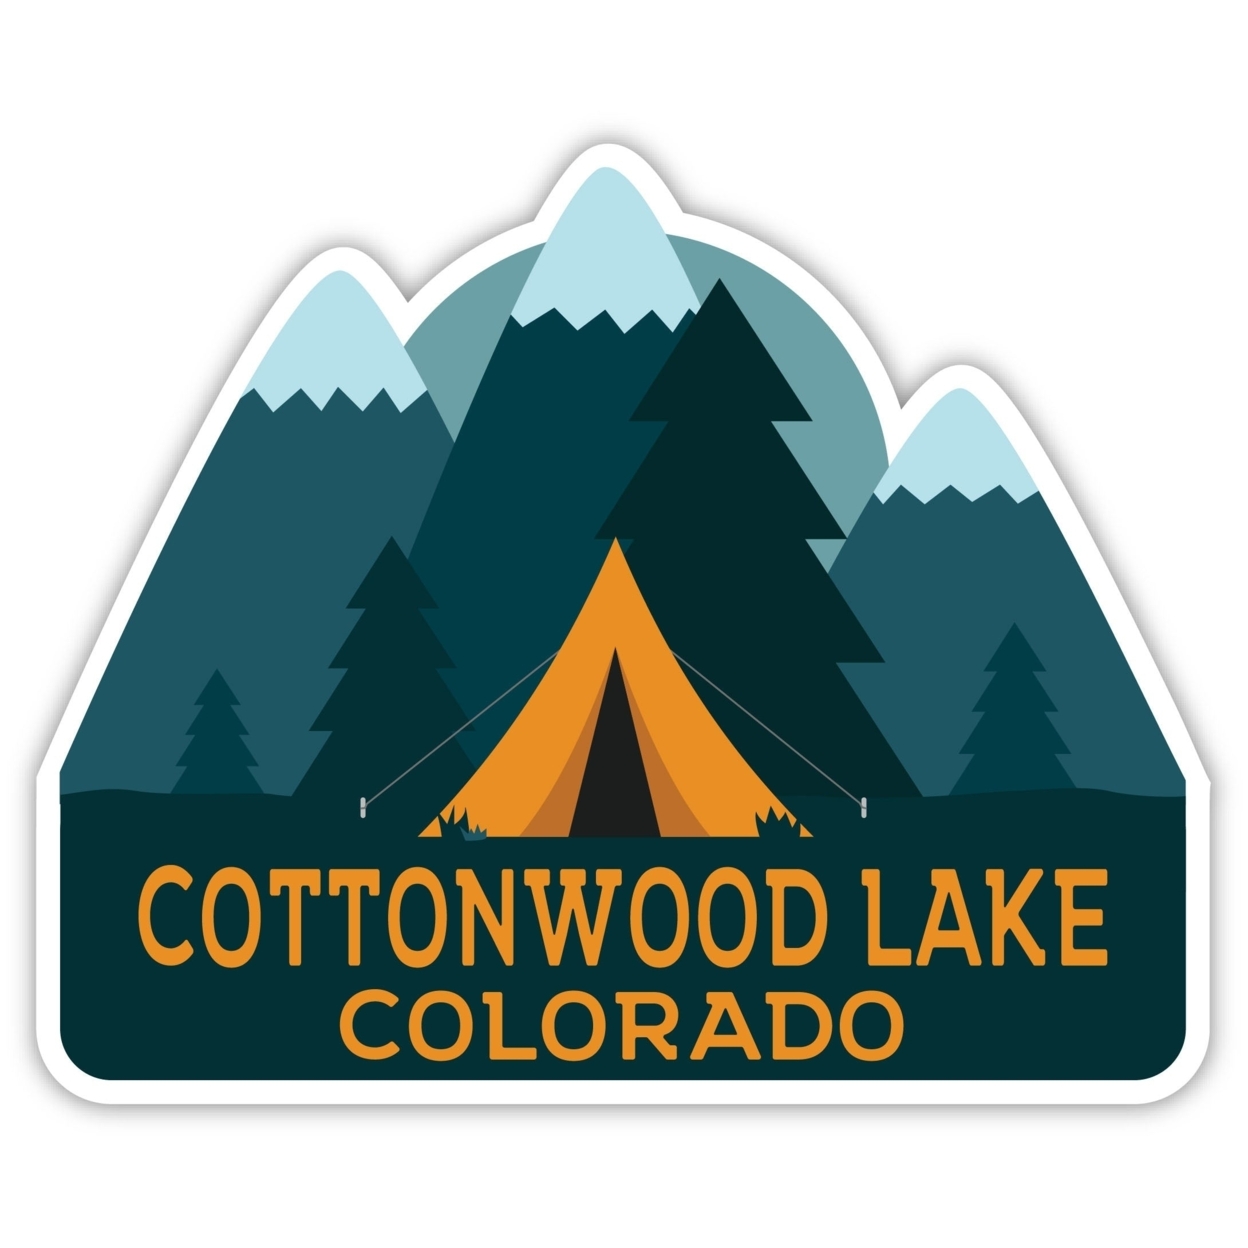 Cottonwood Lake Colorado Souvenir Decorative Stickers (Choose Theme And Size) - 4-Pack, 6-Inch, Great Outdoors